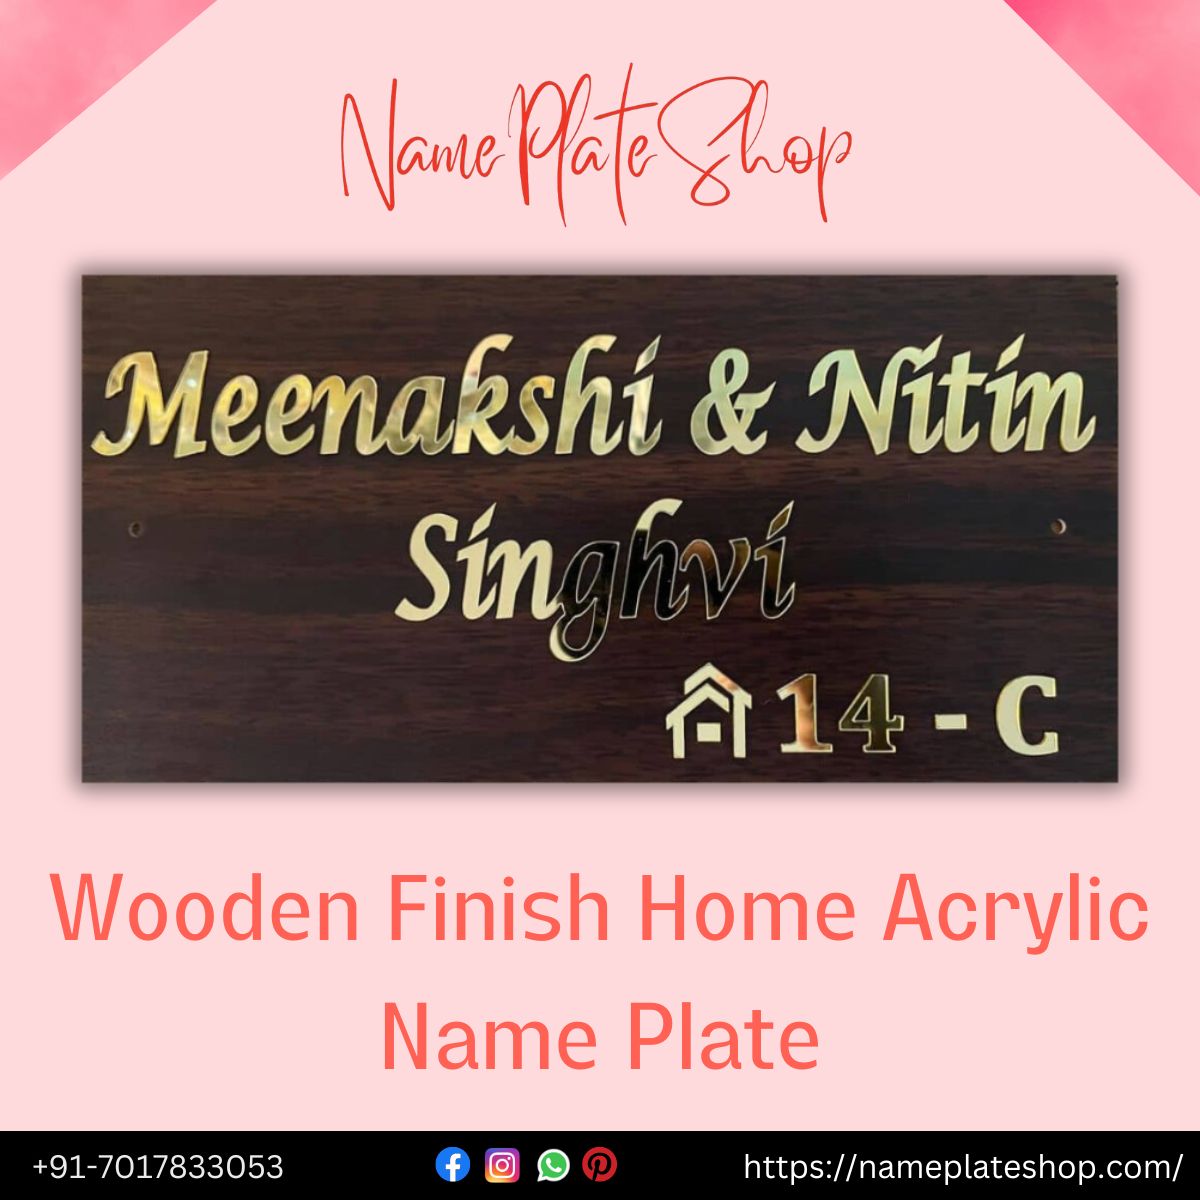 Unique Wooden Finish Acrylic Name Plates for Your Door Warm Welcome Awaits